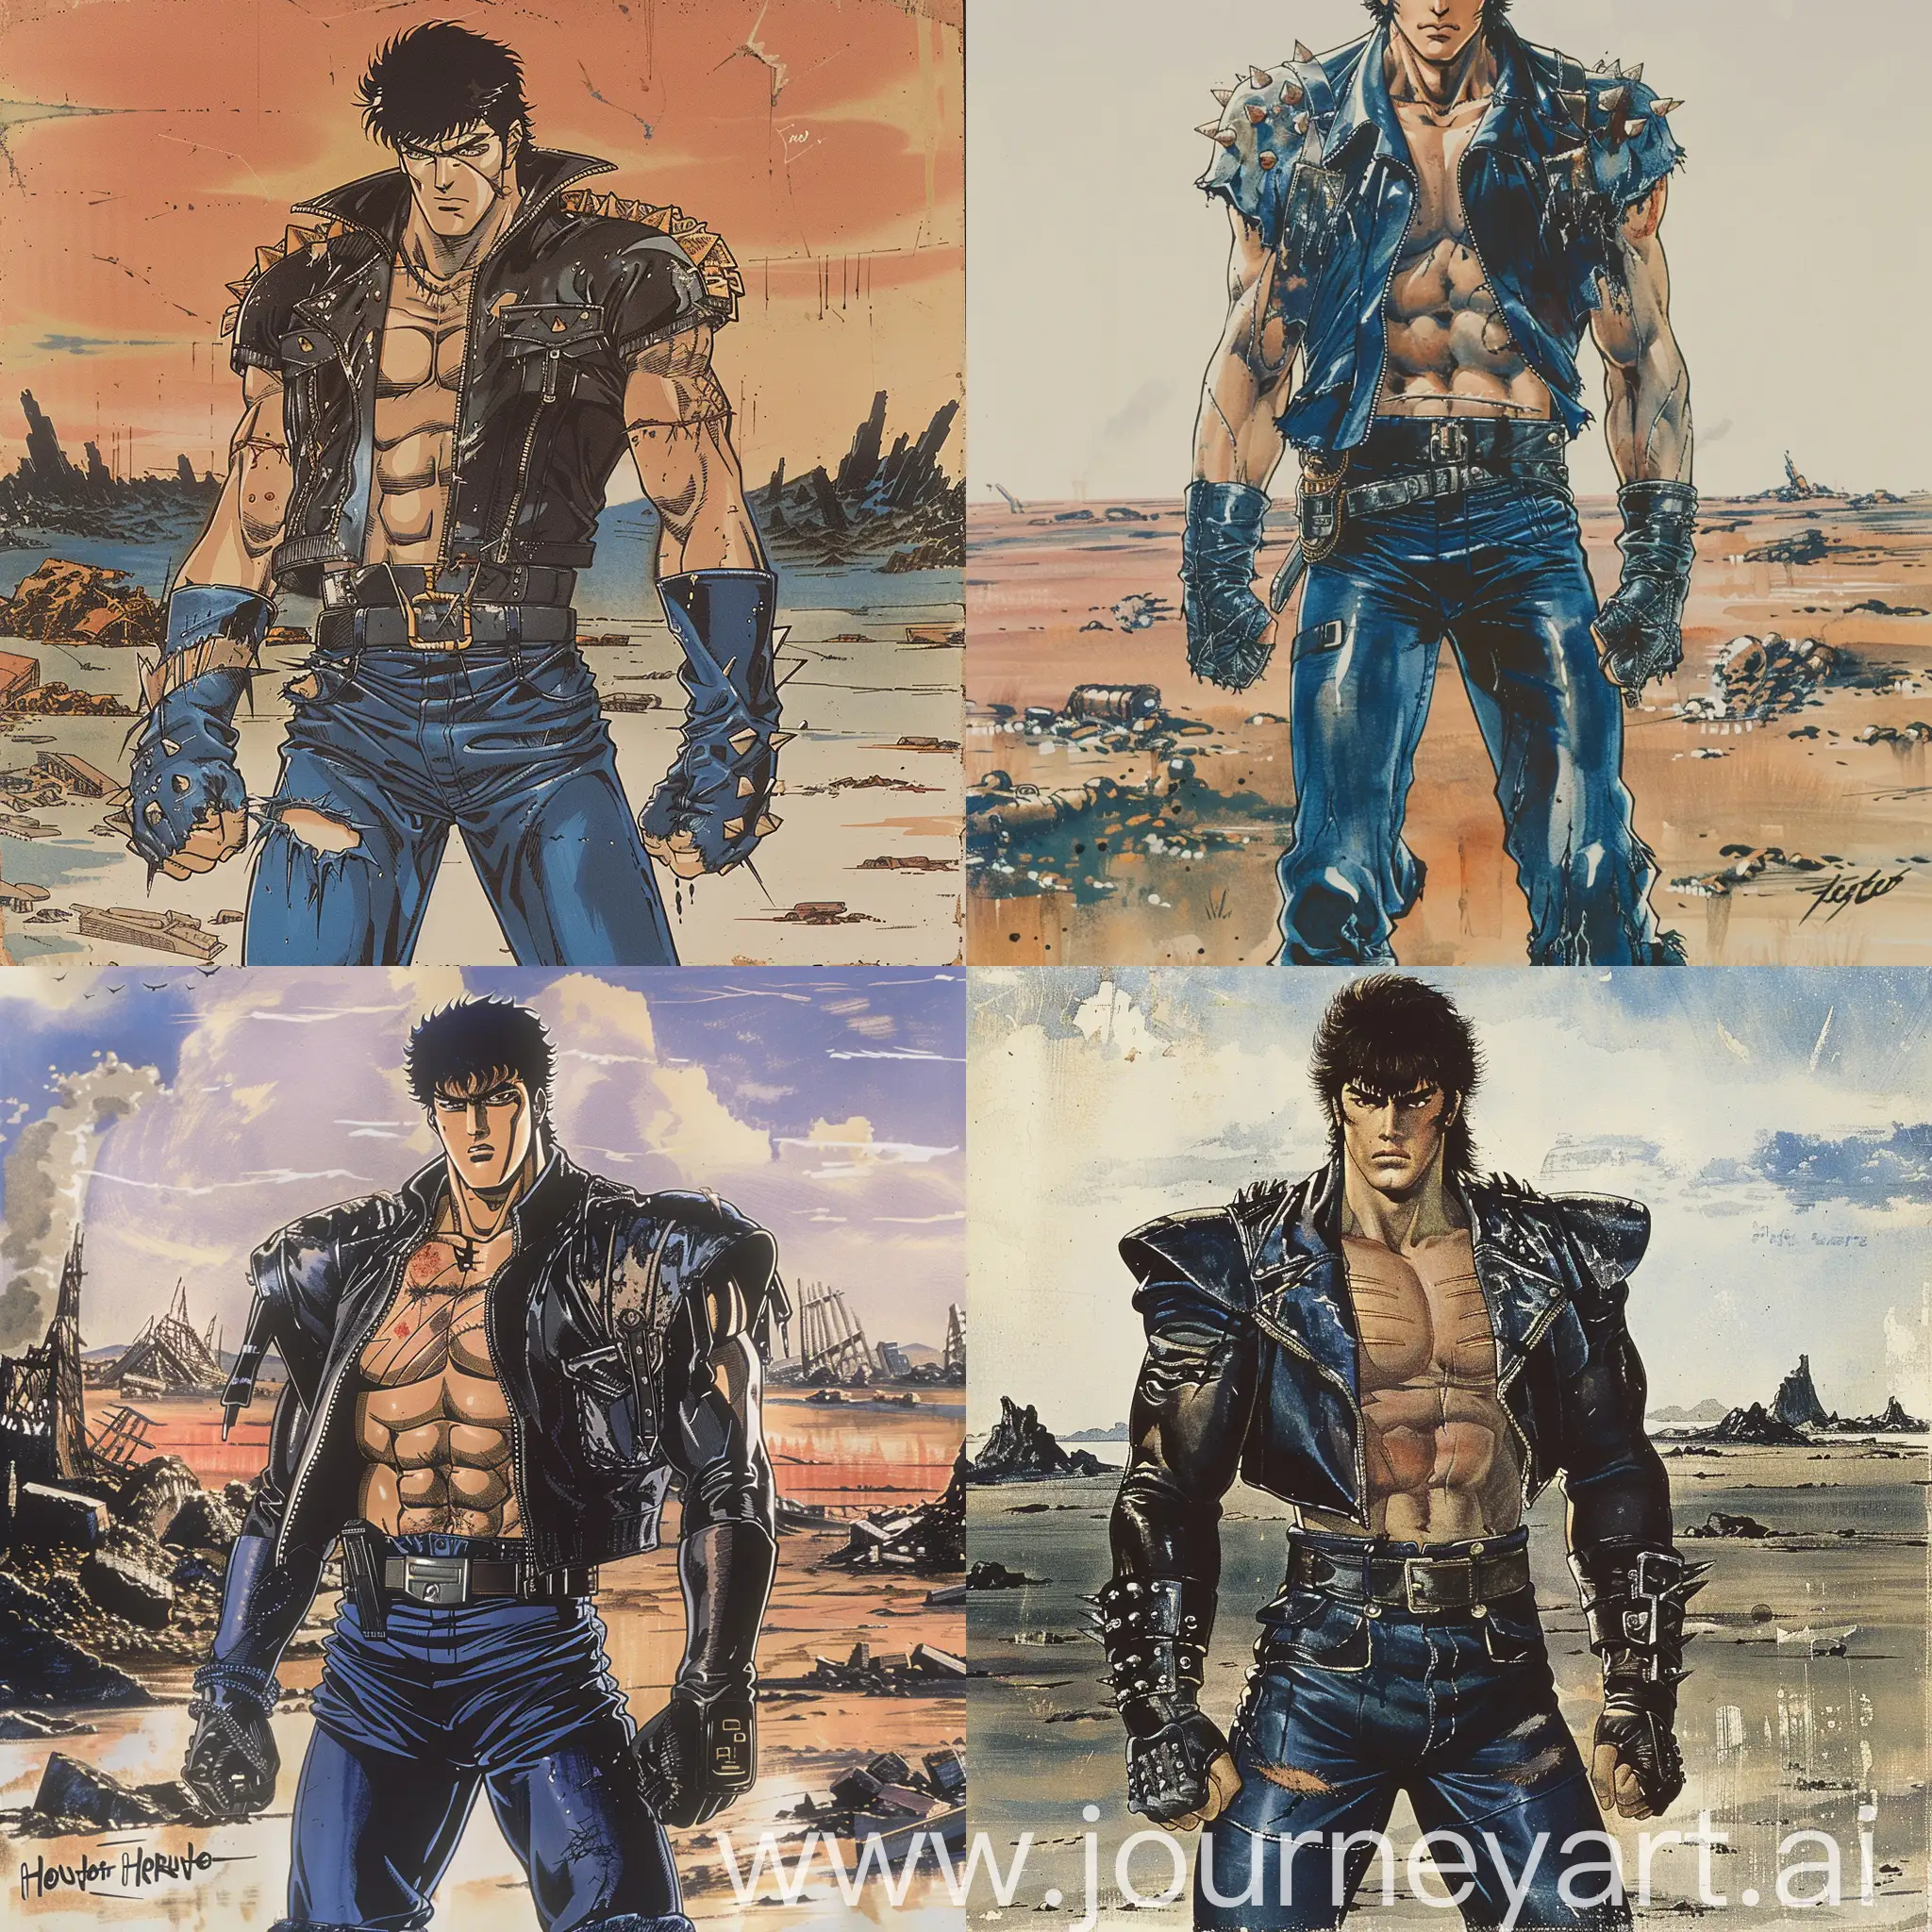  80s anime still, full resolution 4k, Kenshiro (Hokuto No Ken) Fist of the North Star (muscular, with leather pants and a leather jacket also, both in blue-black, with metal shoulder pads and worn leather) (also with his characteristic scars that form the 7 stars of the Hokuto) In the background, a desolate apocalyptic world, illustrator by Tetsuo Hara. 